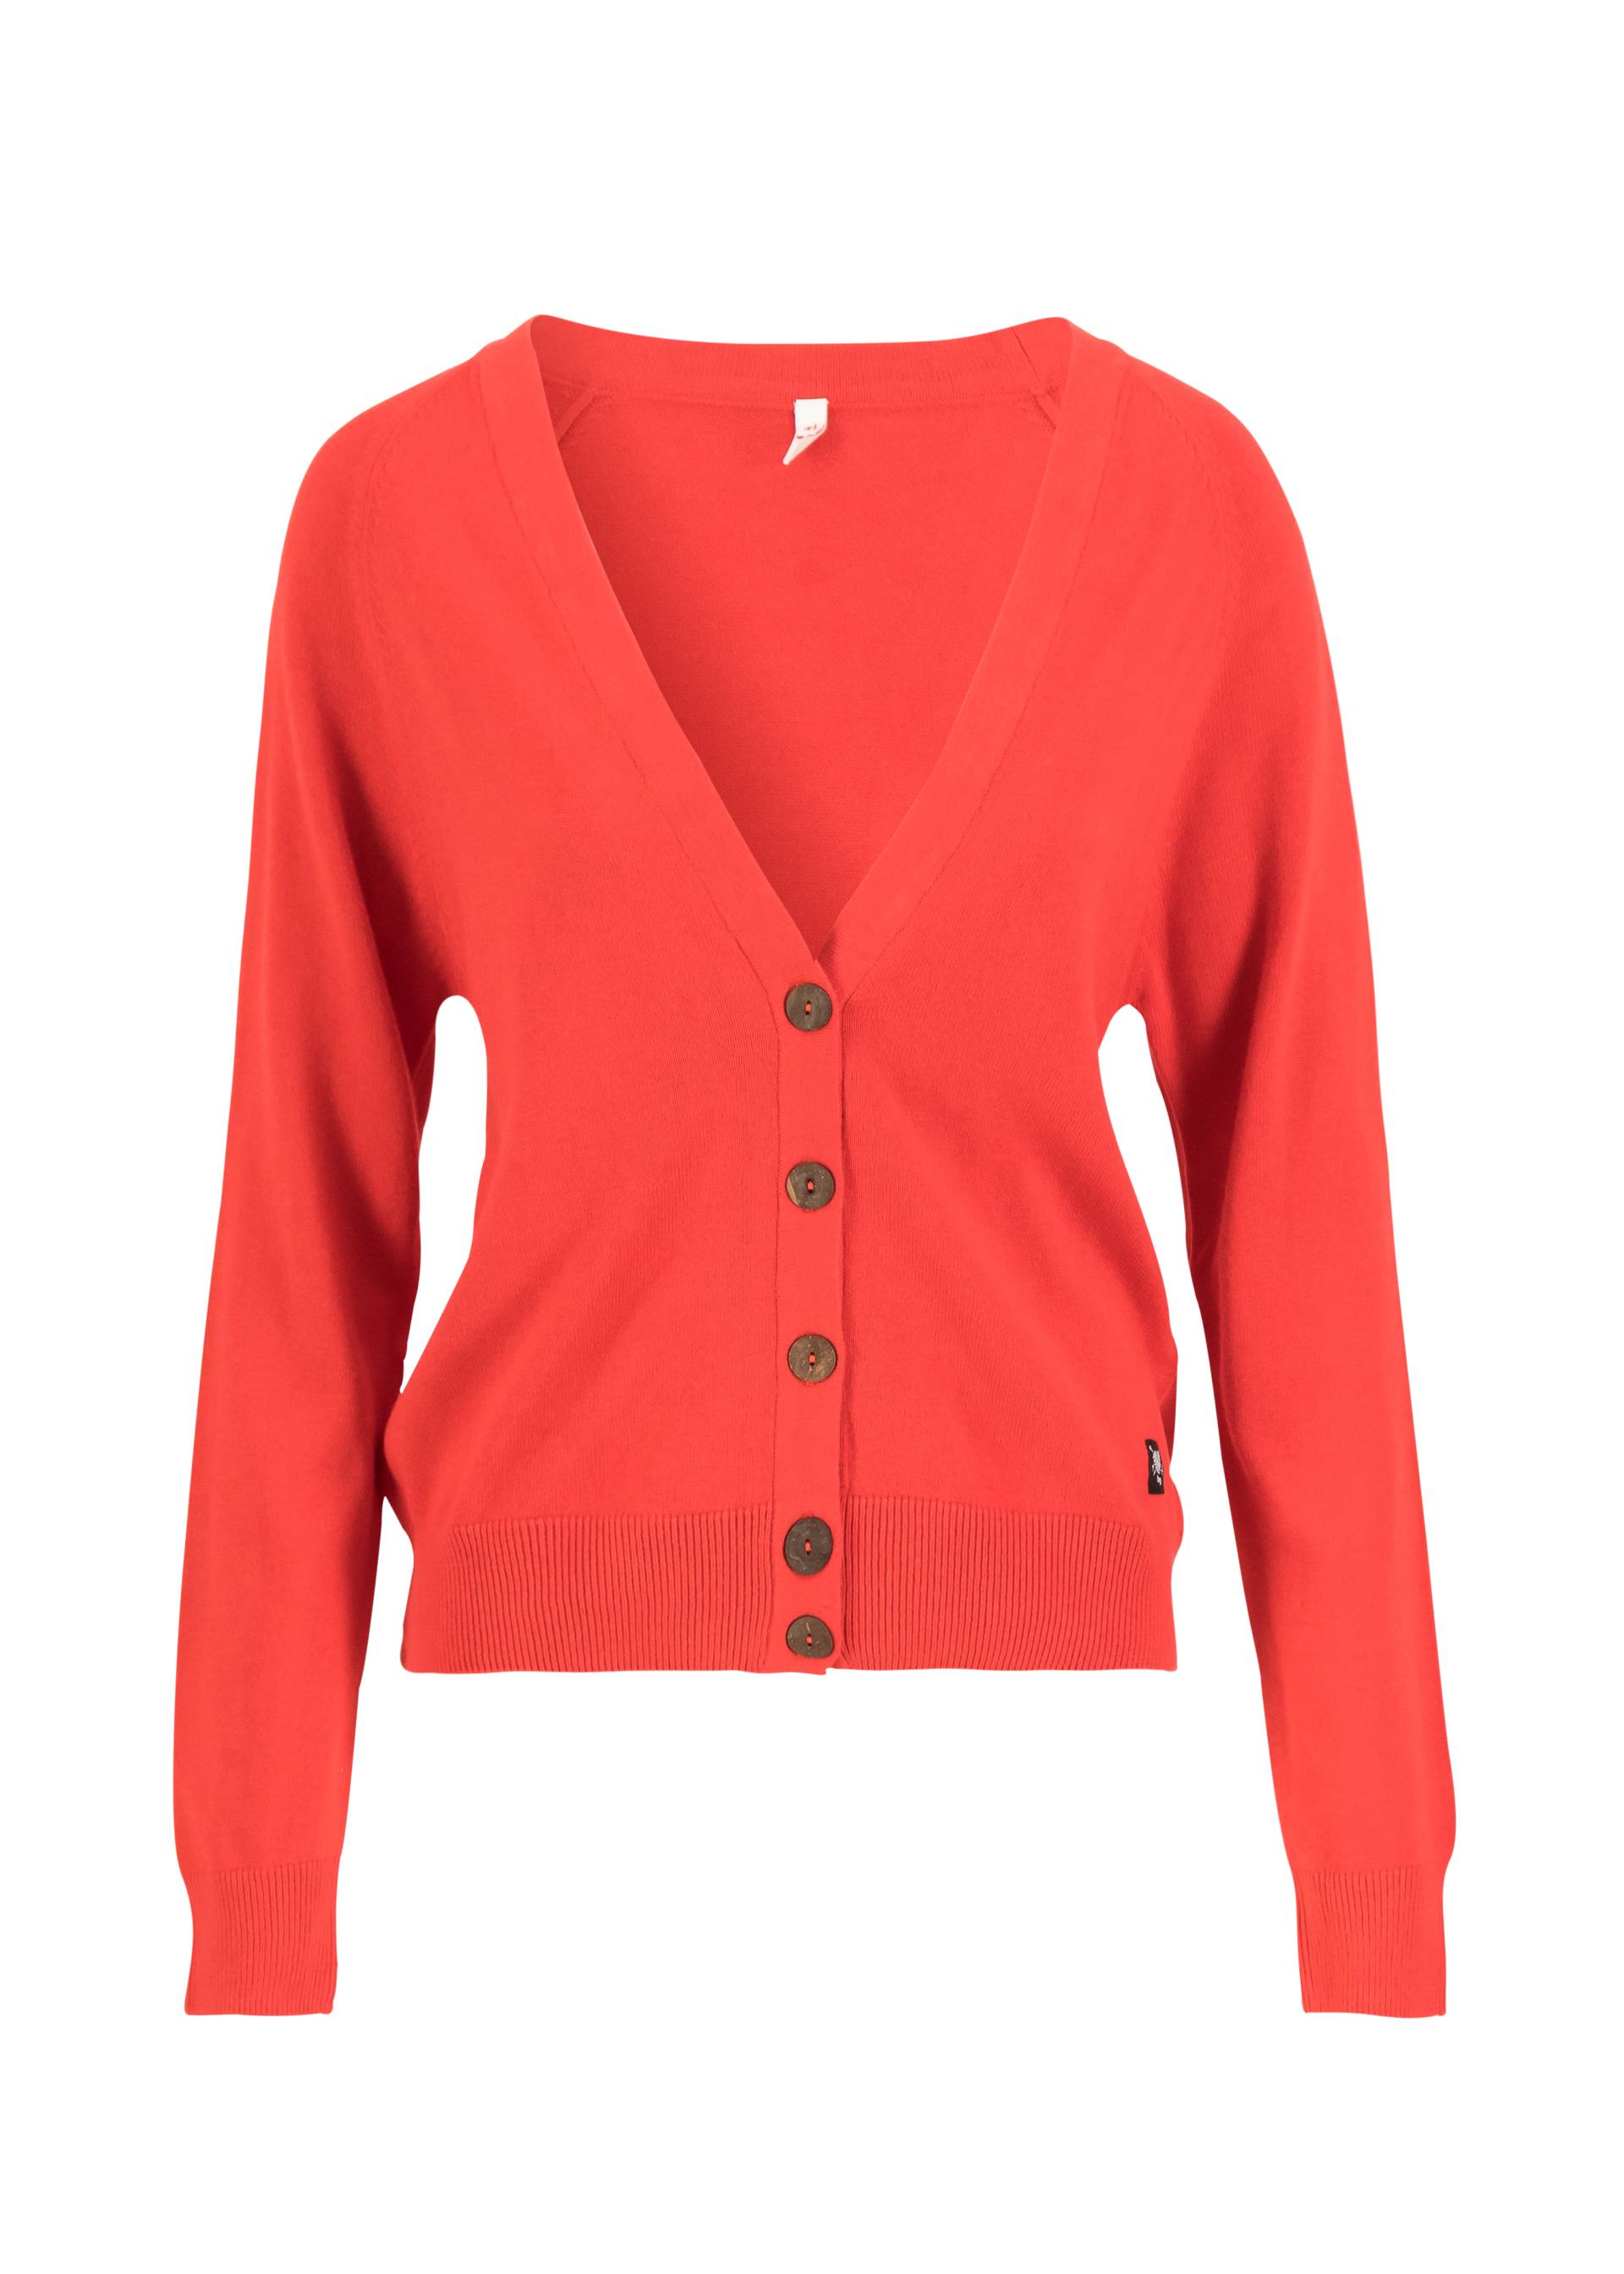 Cardigan Bold at Heart - I am your cherry red